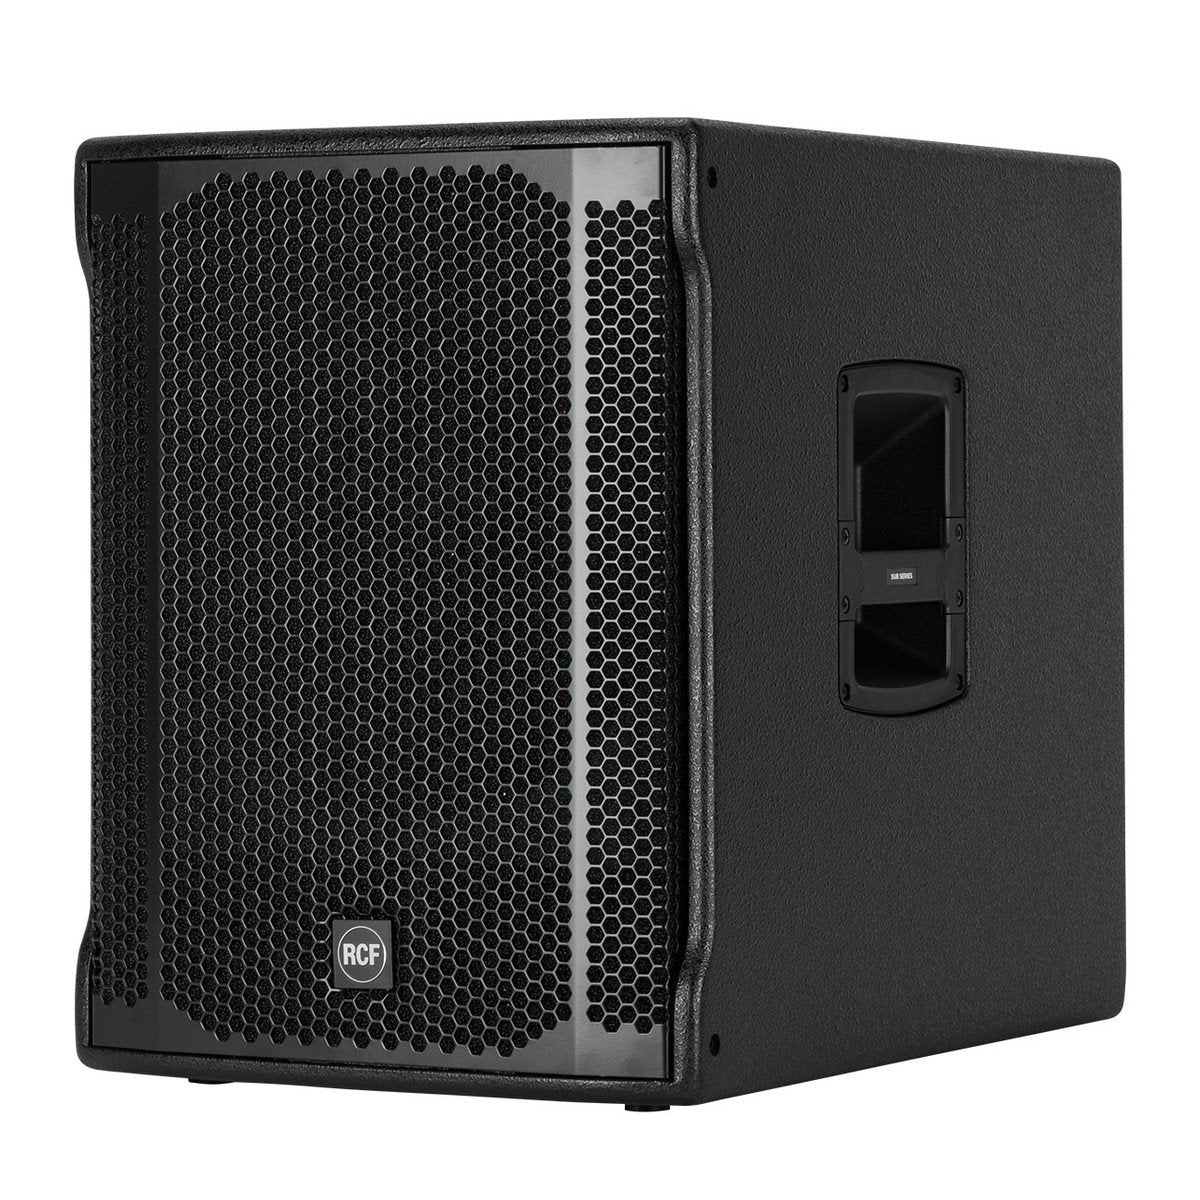 RCF SUB 705-AS II Subwoofer - DY Pro Audio